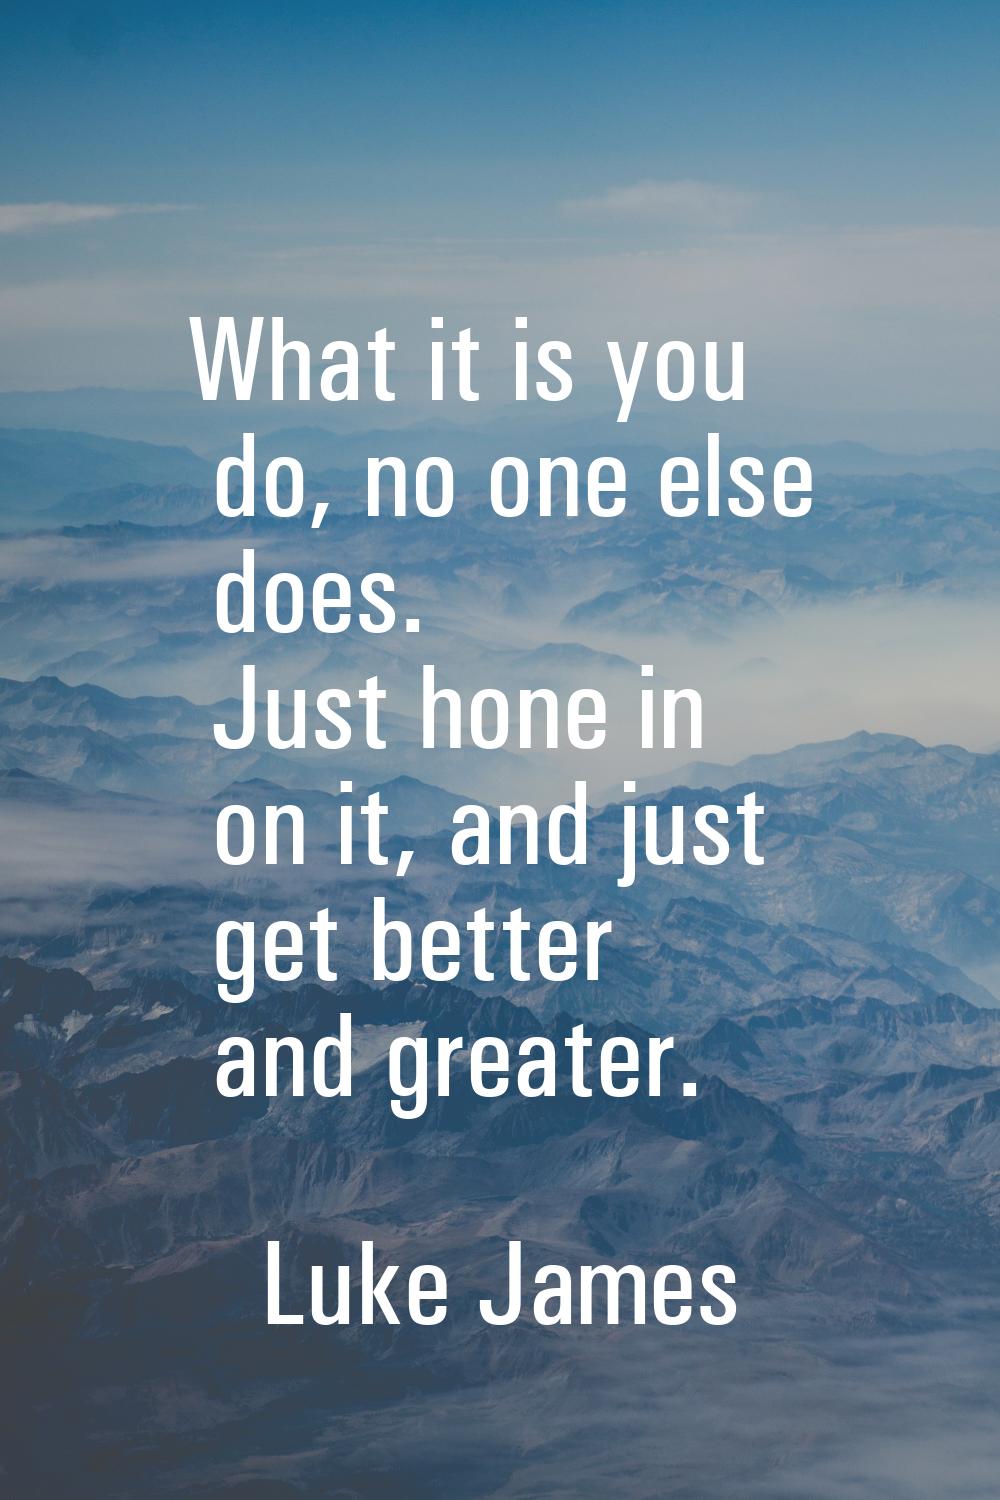 What it is you do, no one else does. Just hone in on it, and just get better and greater.